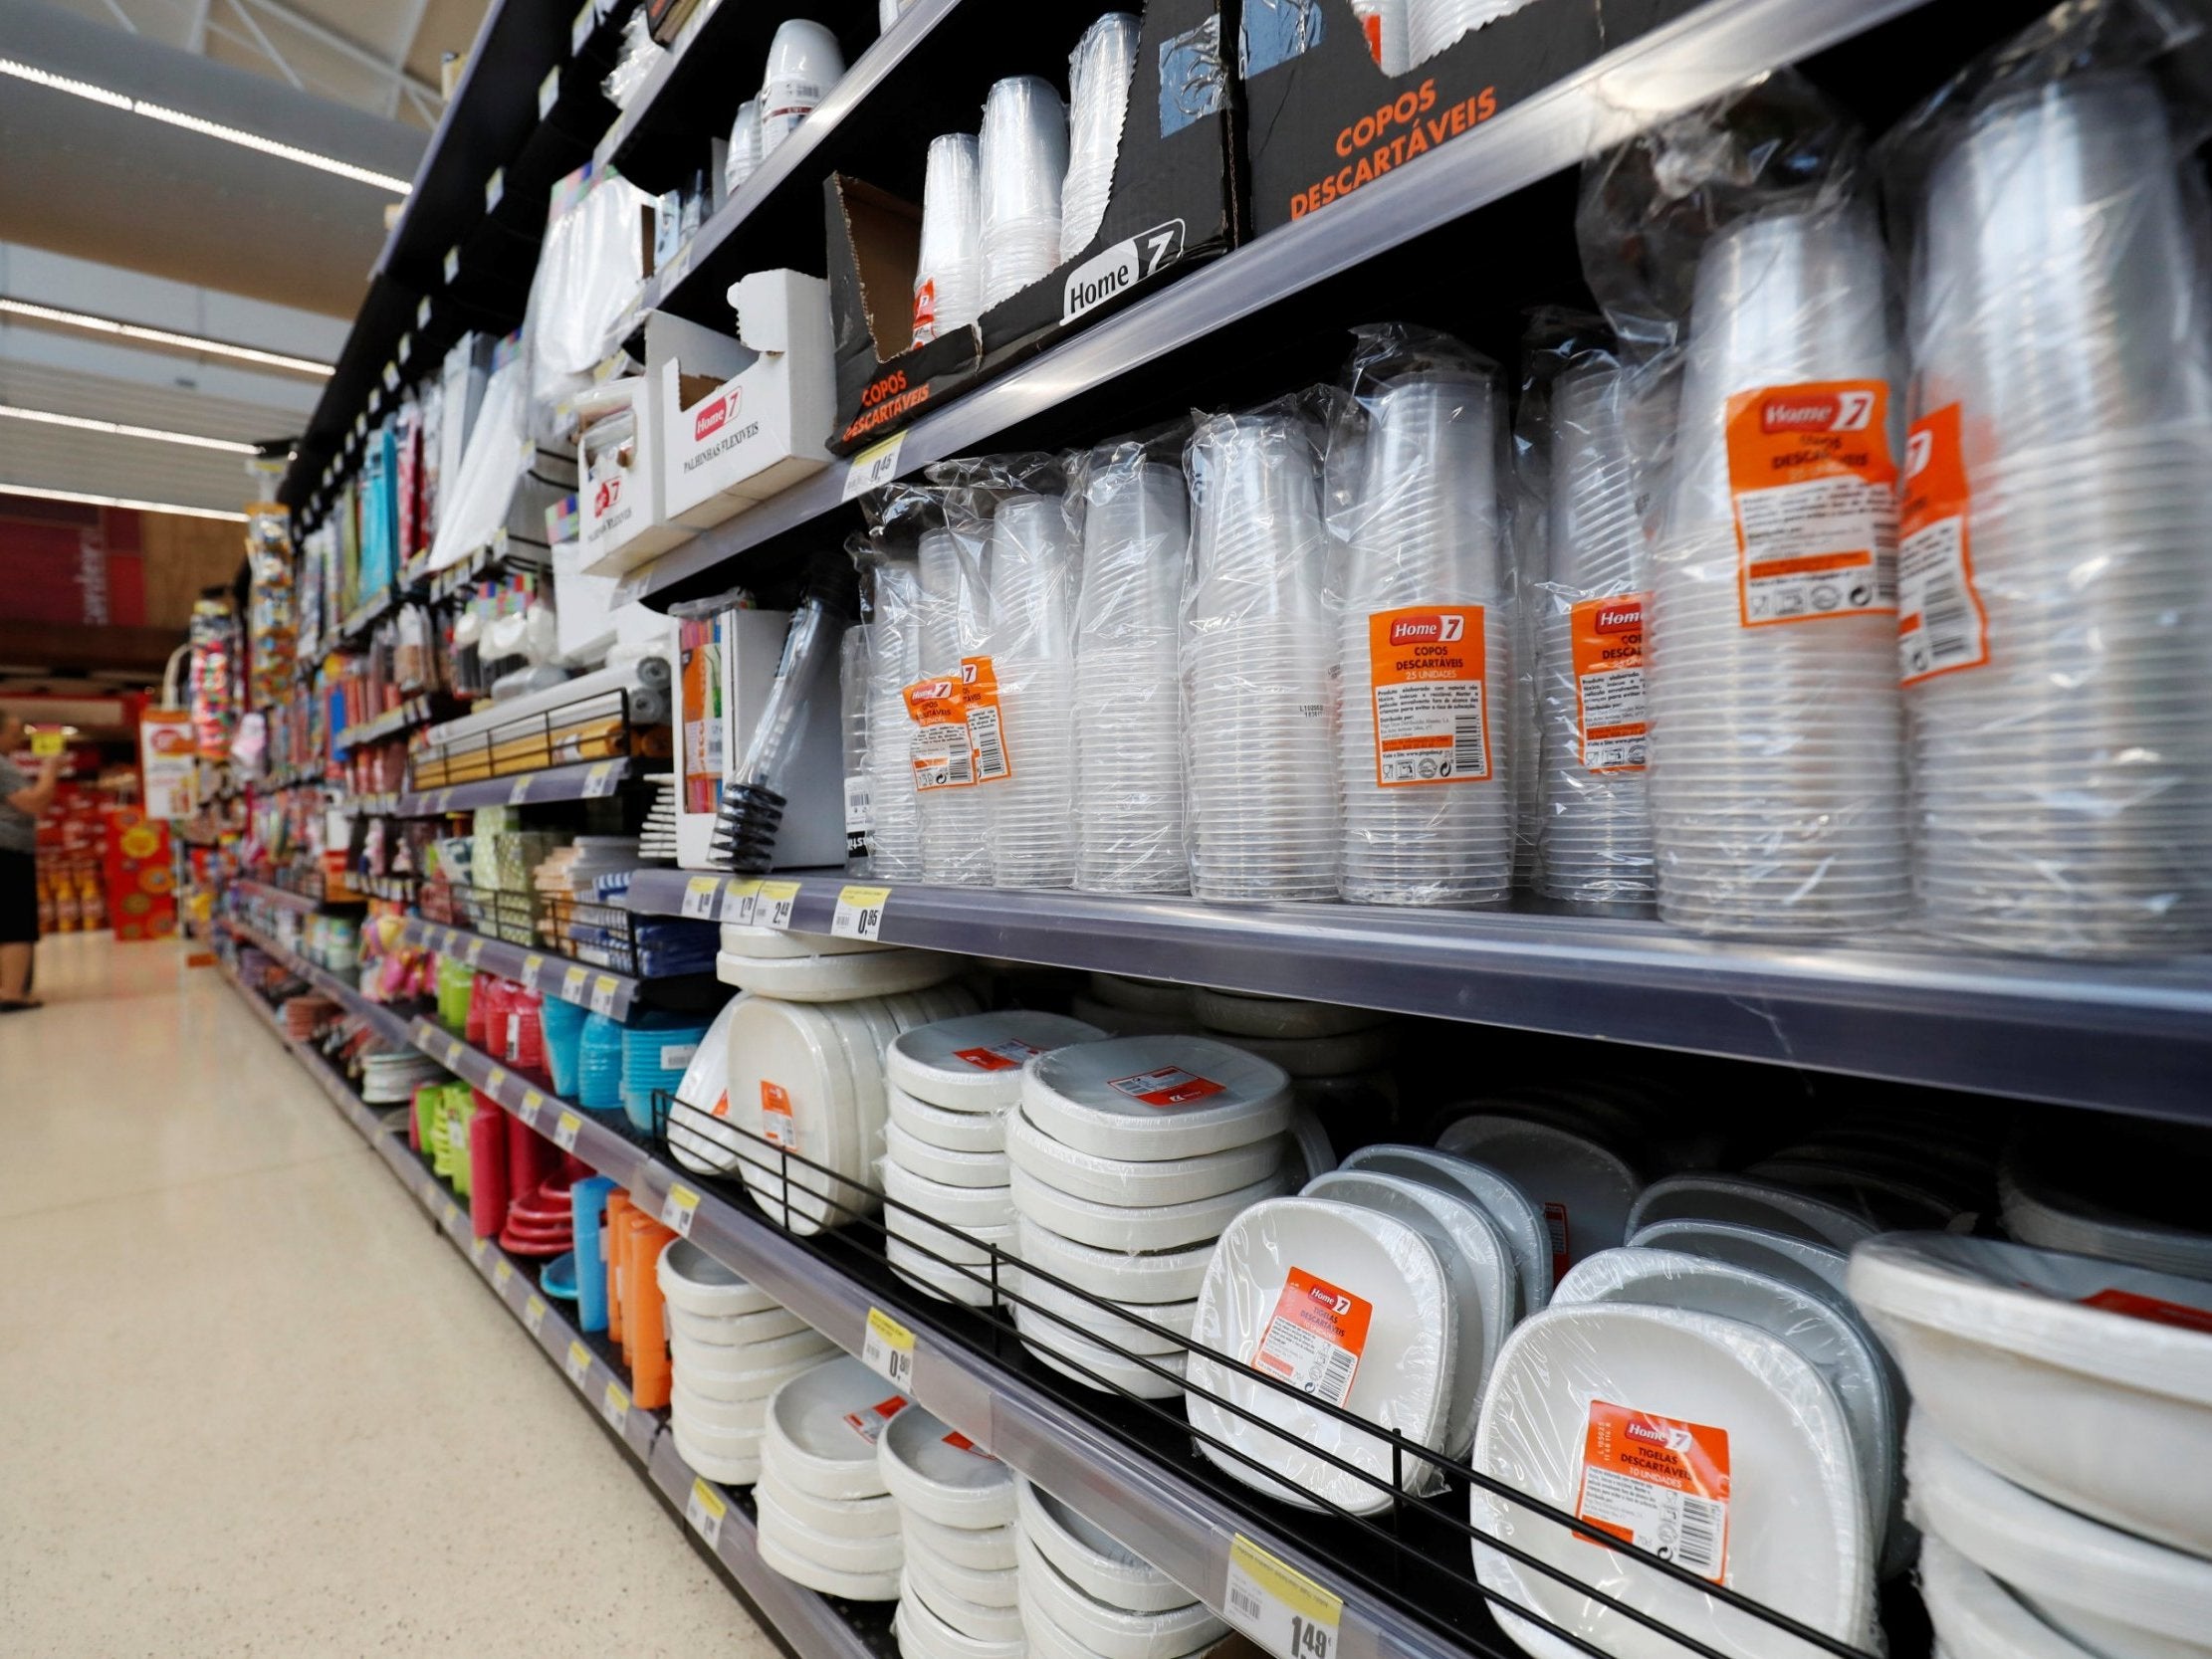 Plastic cups and other products are seen on sale in a supermarket